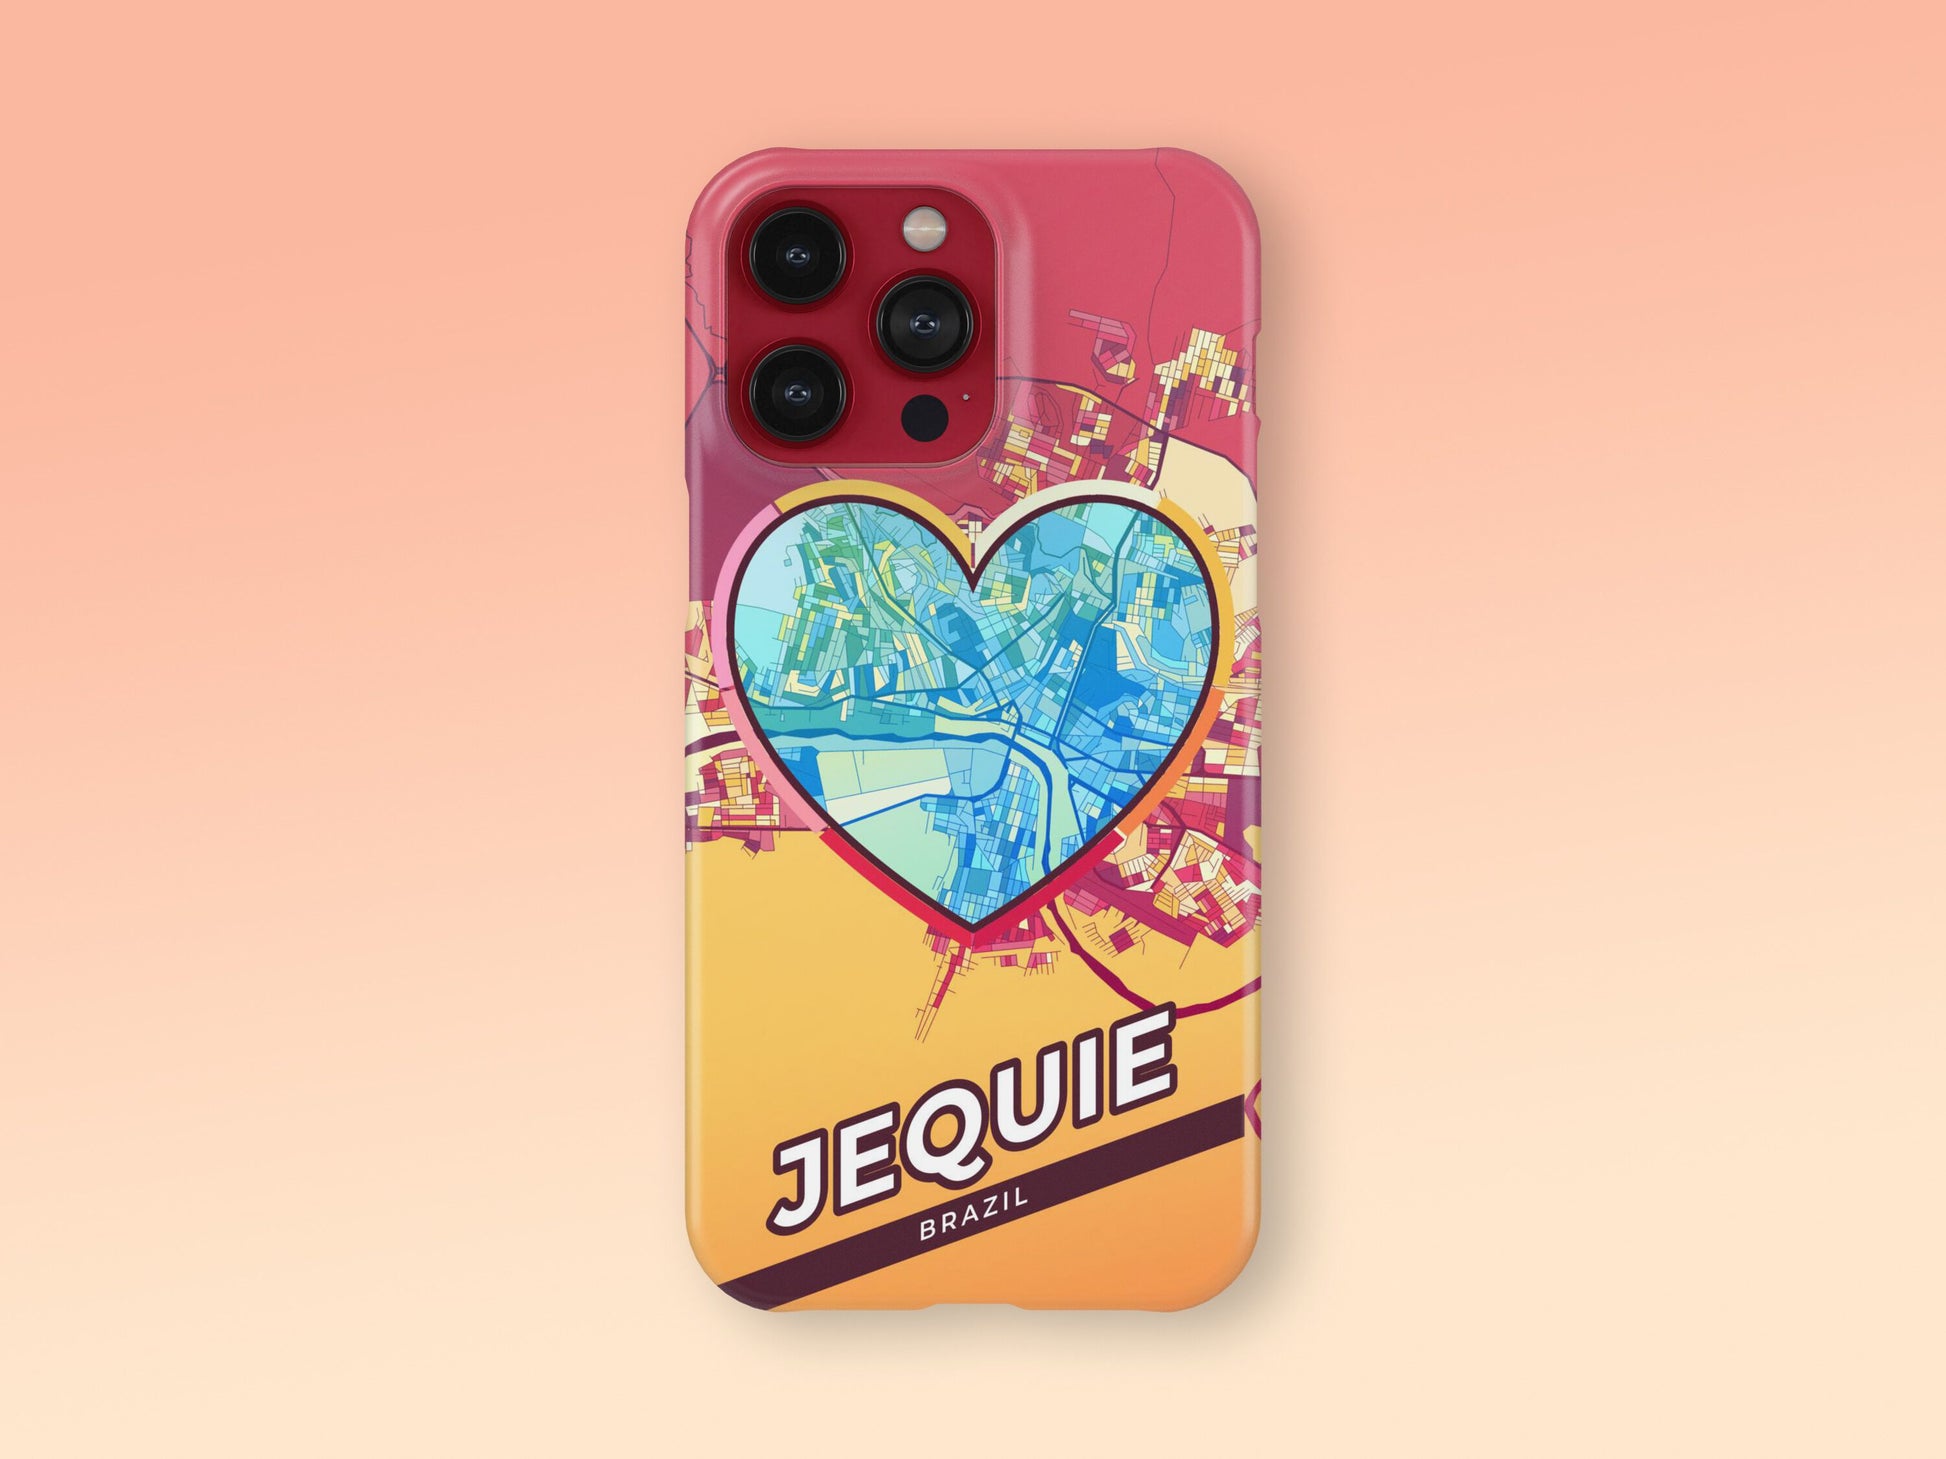 Jequie Brazil slim phone case with colorful icon. Birthday, wedding or housewarming gift. Couple match cases. 2